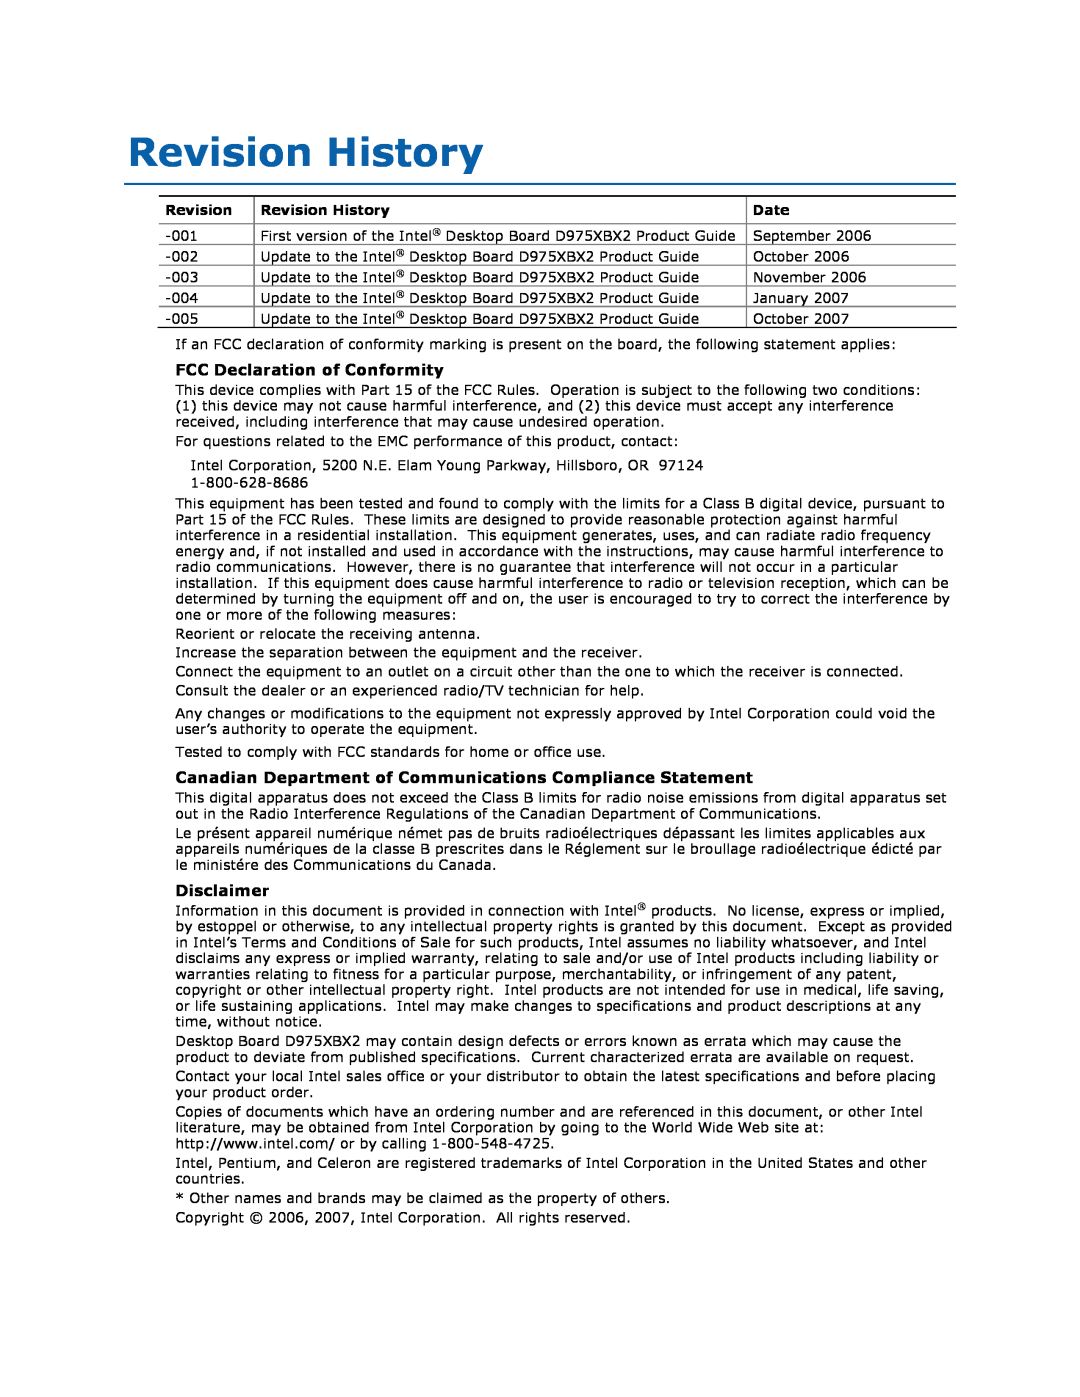 Intel D975XBX2 manual Revision History, FCC Declaration of Conformity, Disclaimer, Date 